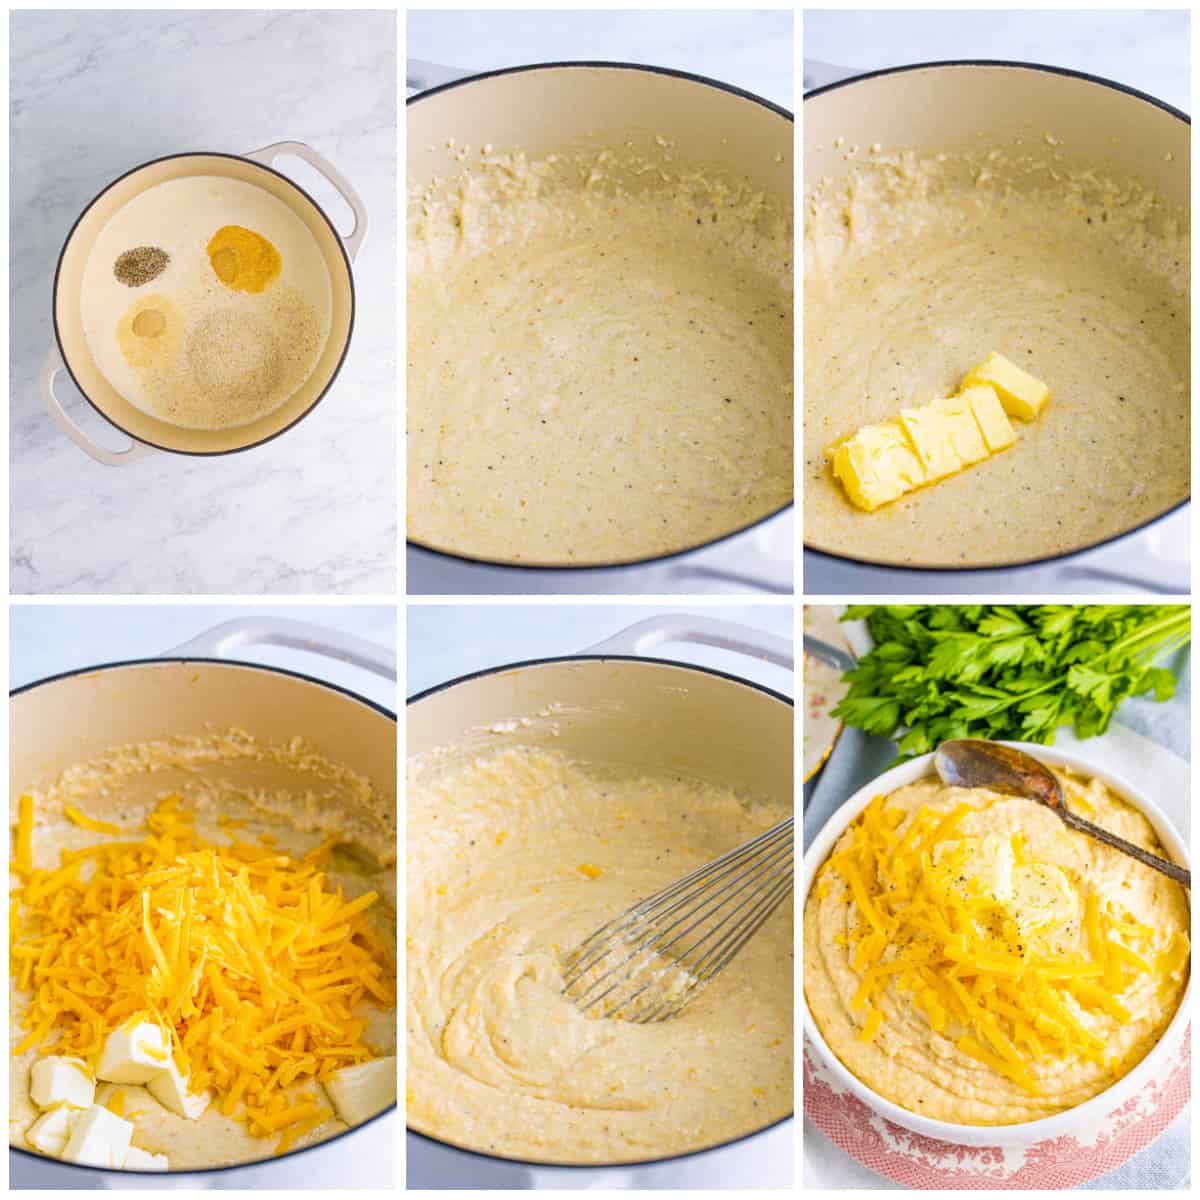 Step by step photos on how to make Cheese Grits.